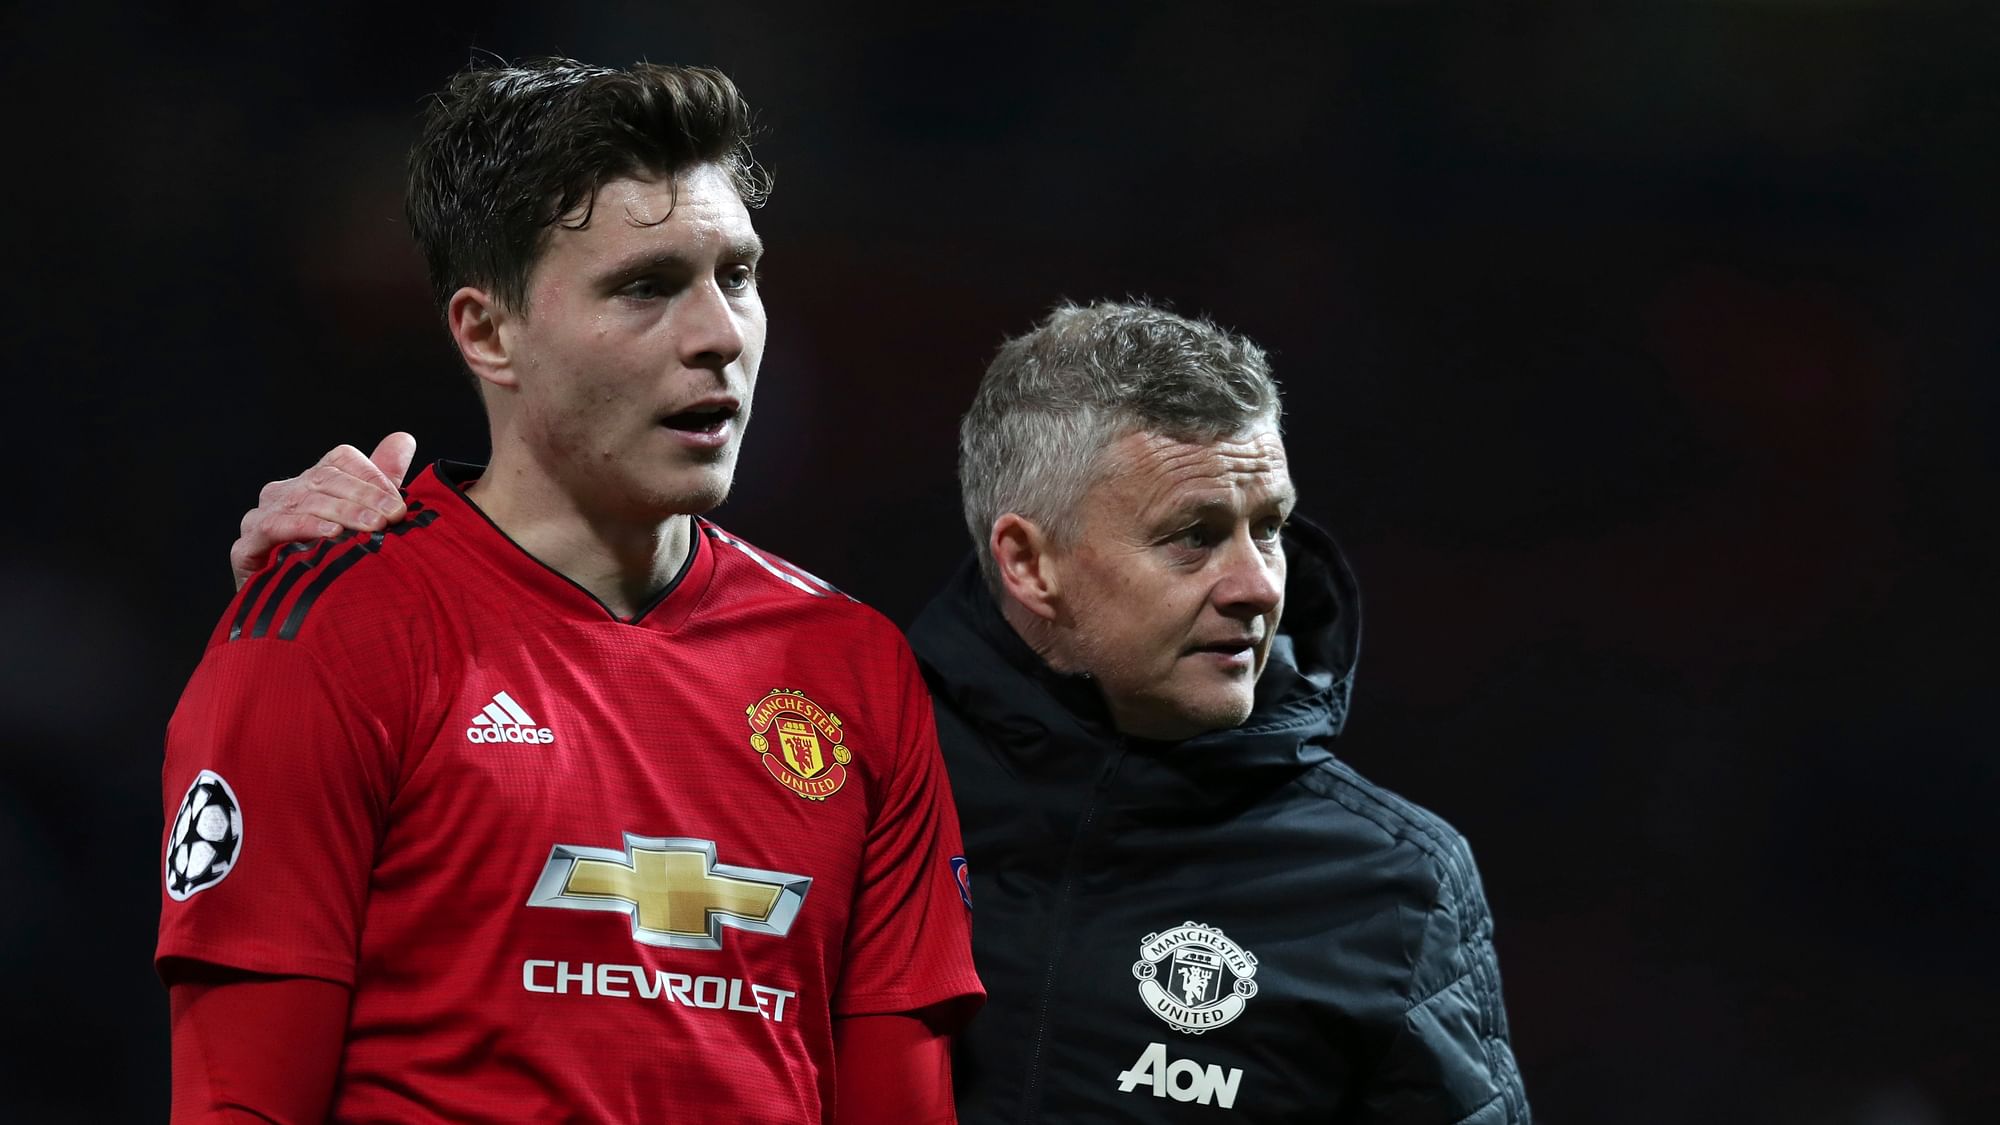 Solskjaer’s remarkable early form as United manager, which brought 14 wins from 17 matches, has dropped off alarmingly, with seven defeats in nine games.